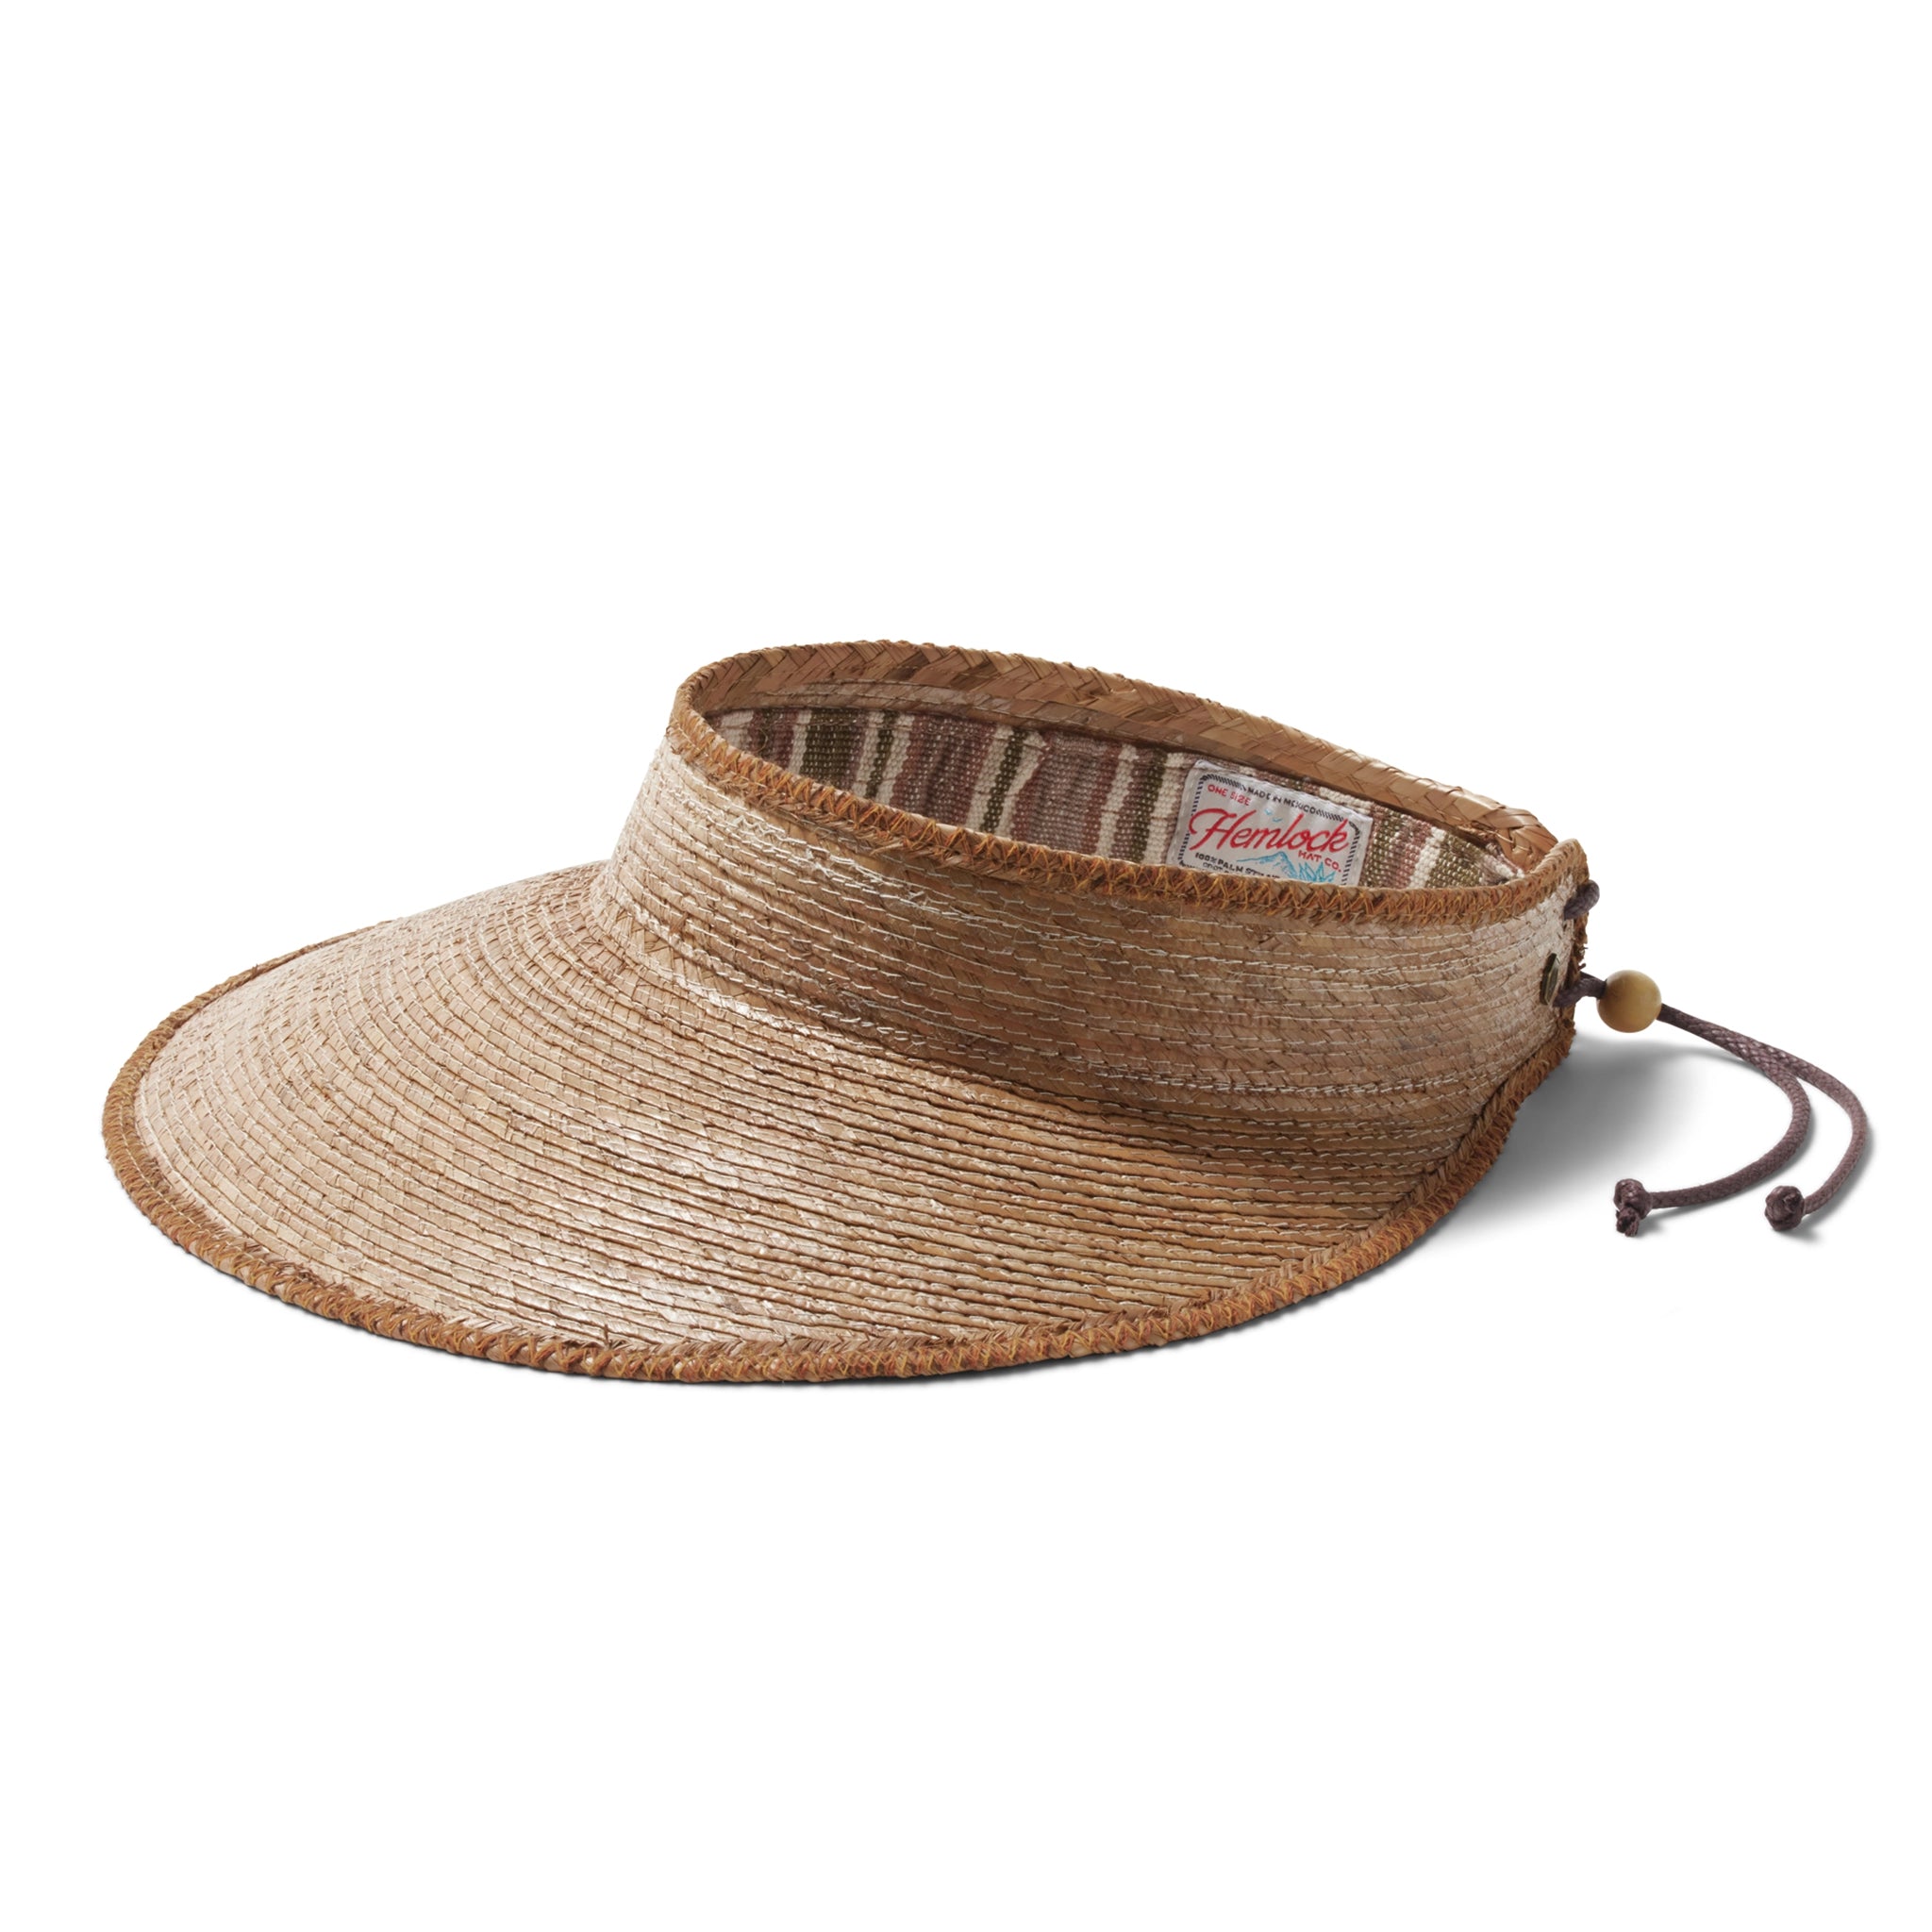 A woven straw visor hat with a large brim and beaded slip knot tie on the back that is adjustable, worn here on a model wearing a tank top and tan pants in front of a white background.